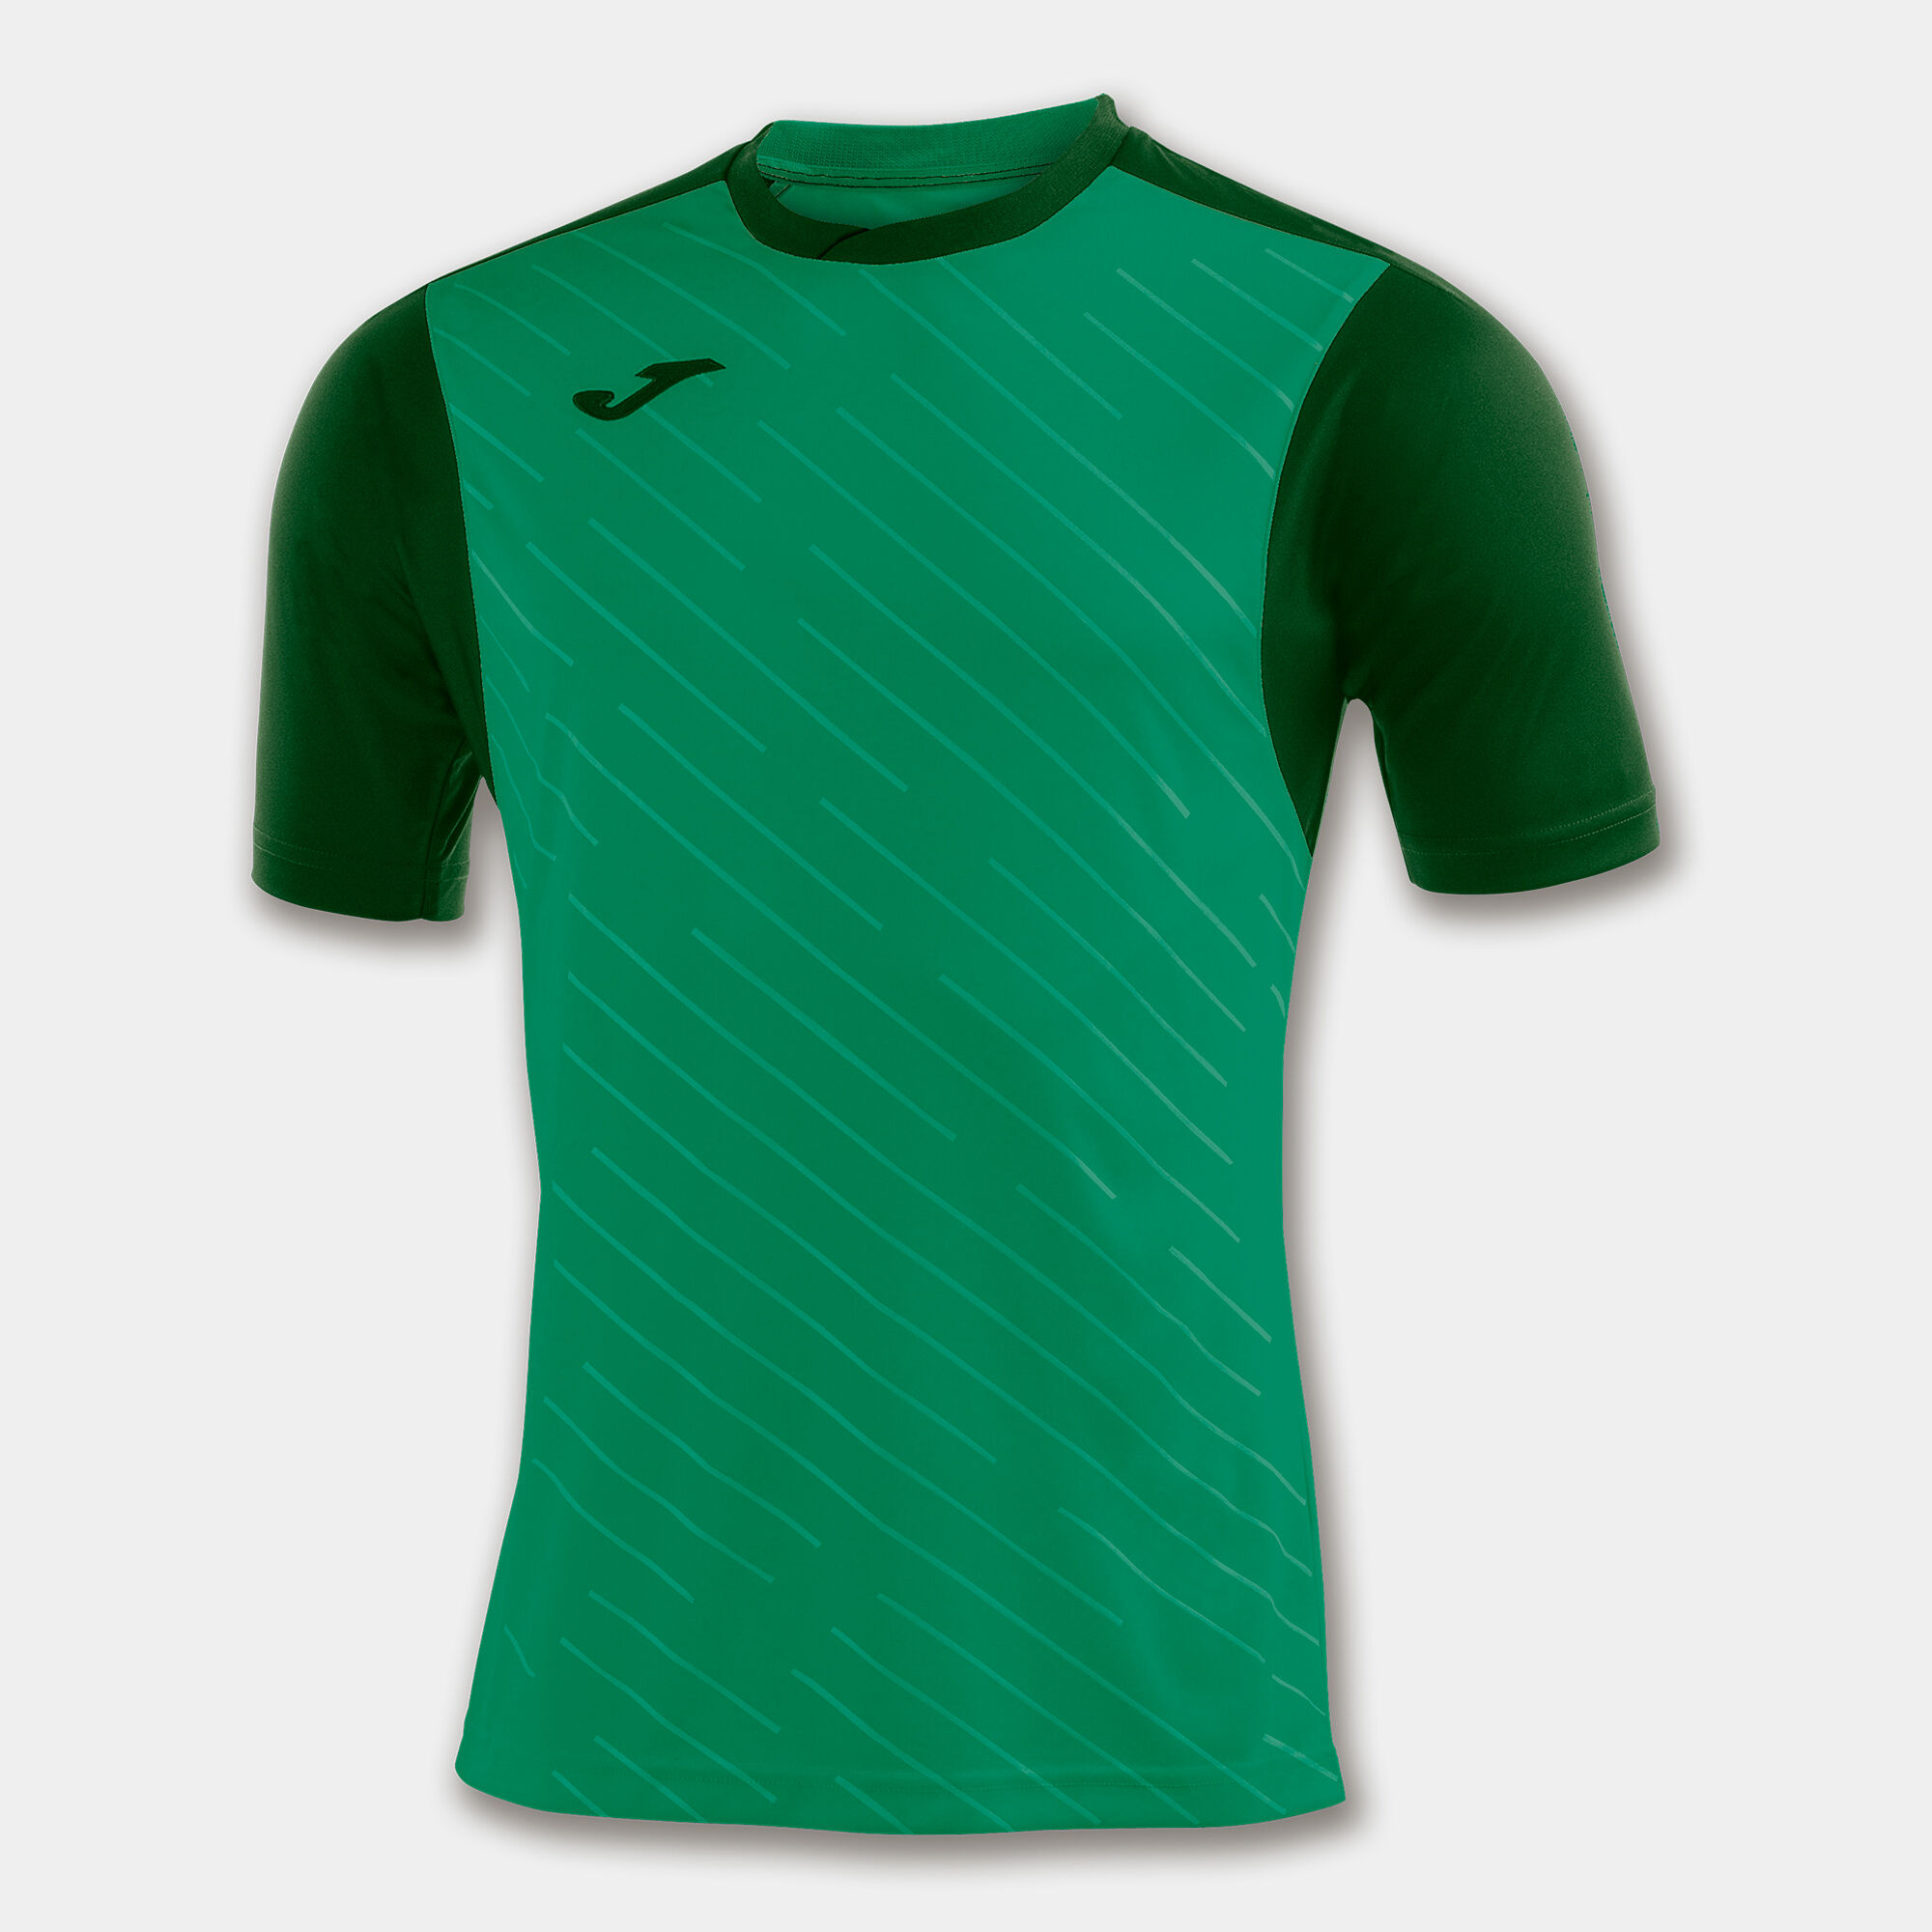 MAILLOT MANCHES COURTES HOMME TORNEO II VERT